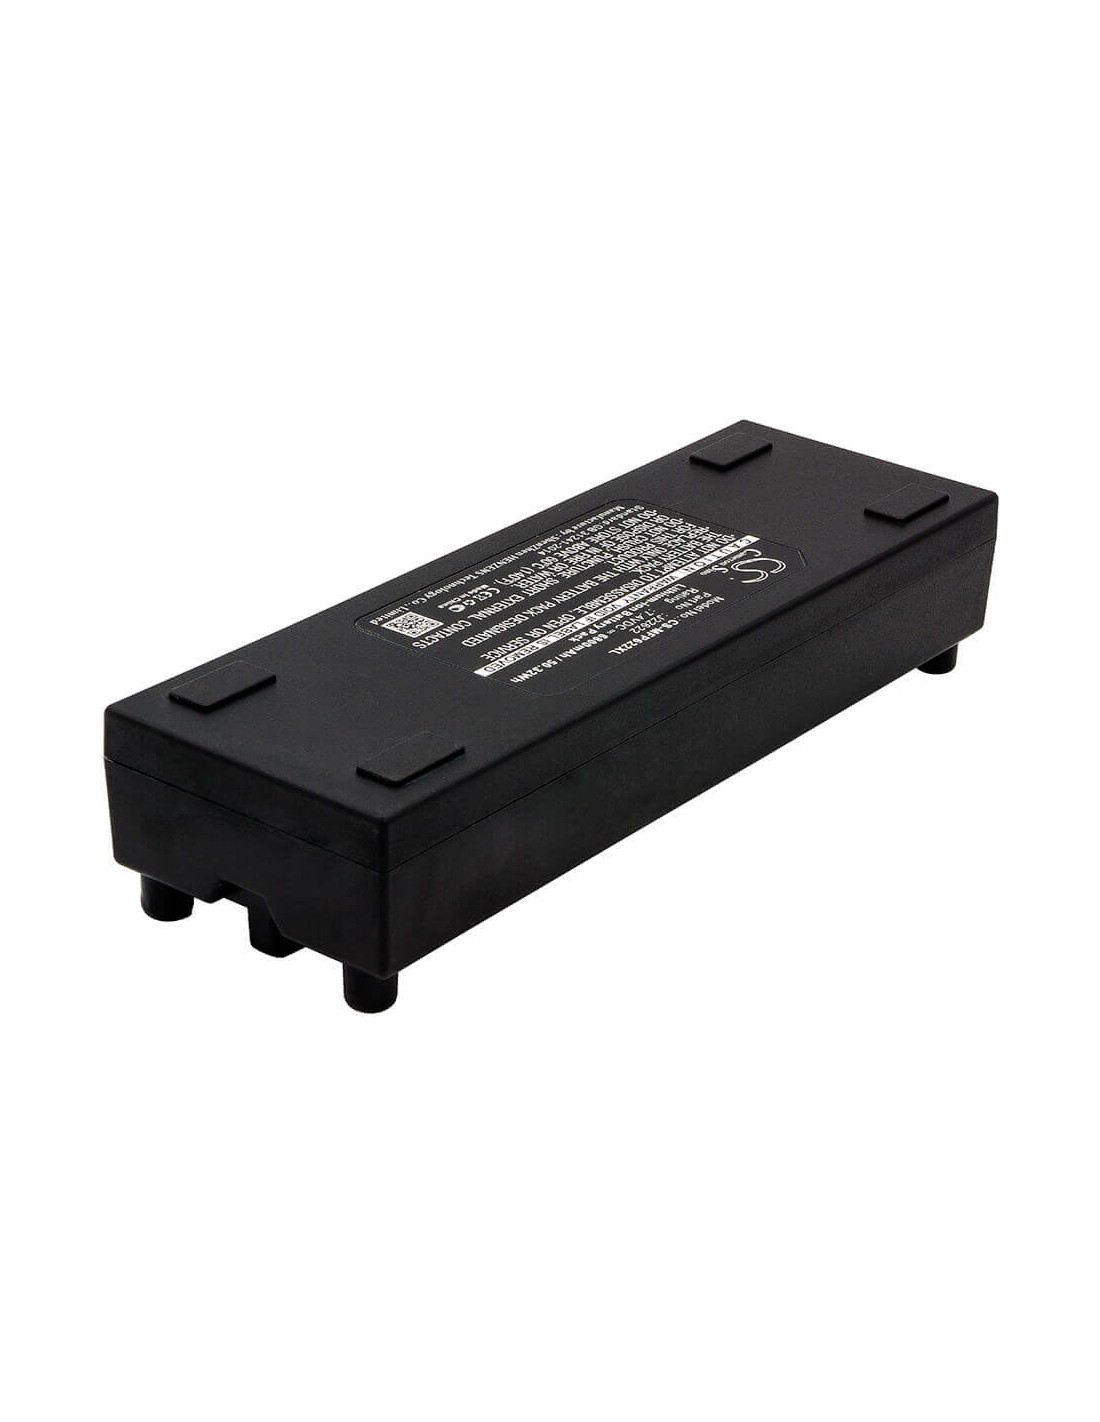 Battery for Mackie, Freeplay, Freeplay Portable Pa System 7.4V, 6800mAh - 50.32Wh